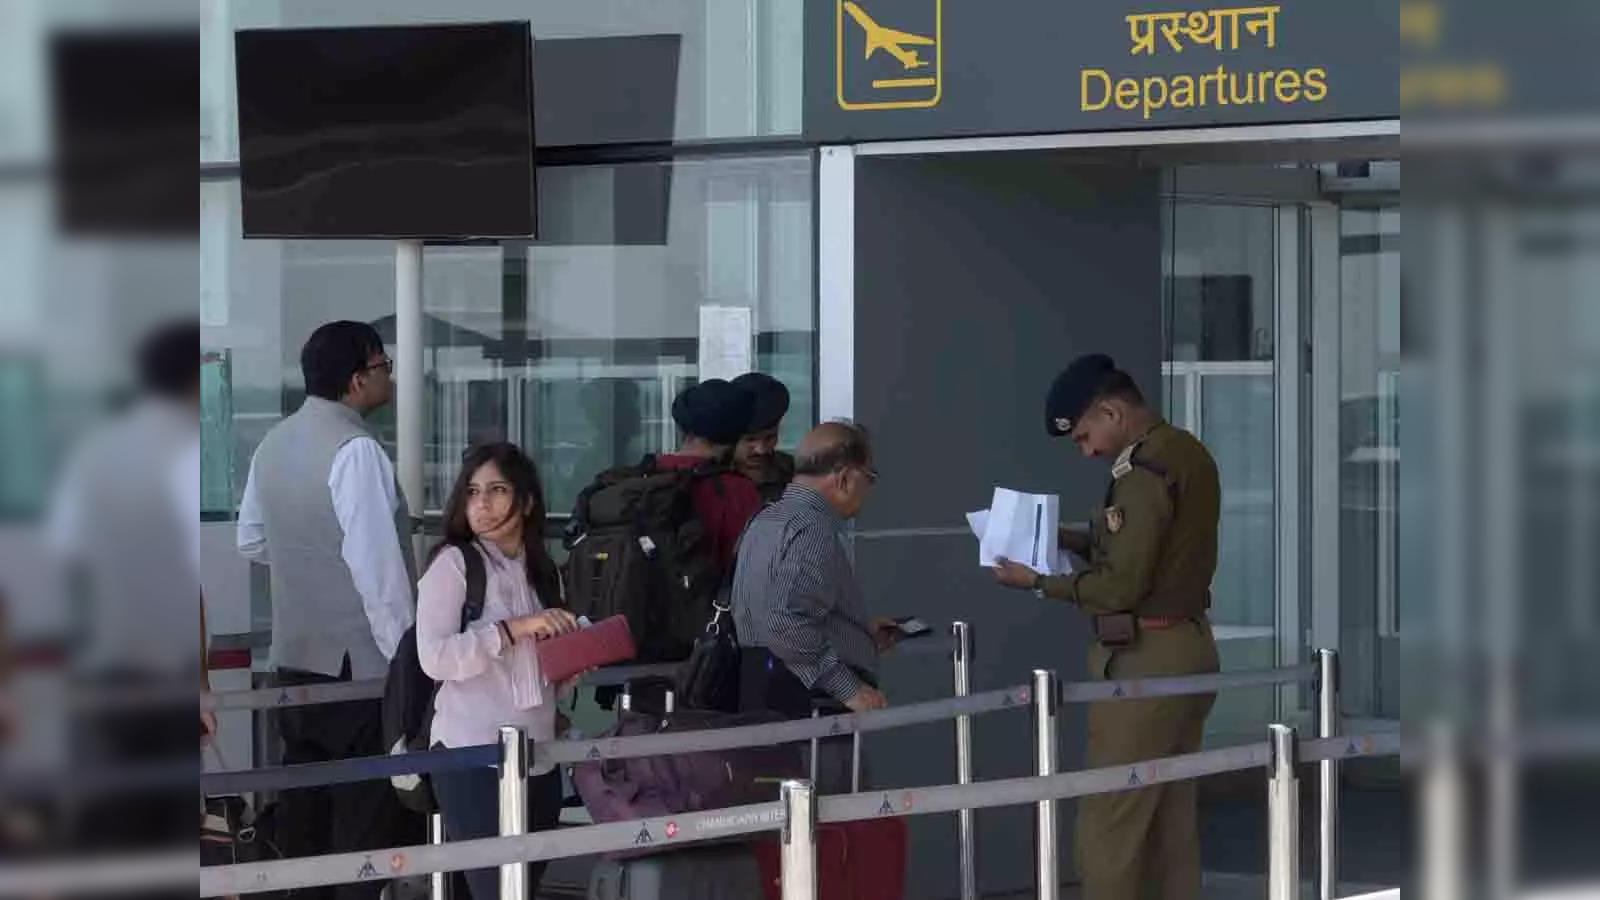 Airport safety: Delhi airport to introduce full-body scanners: Why